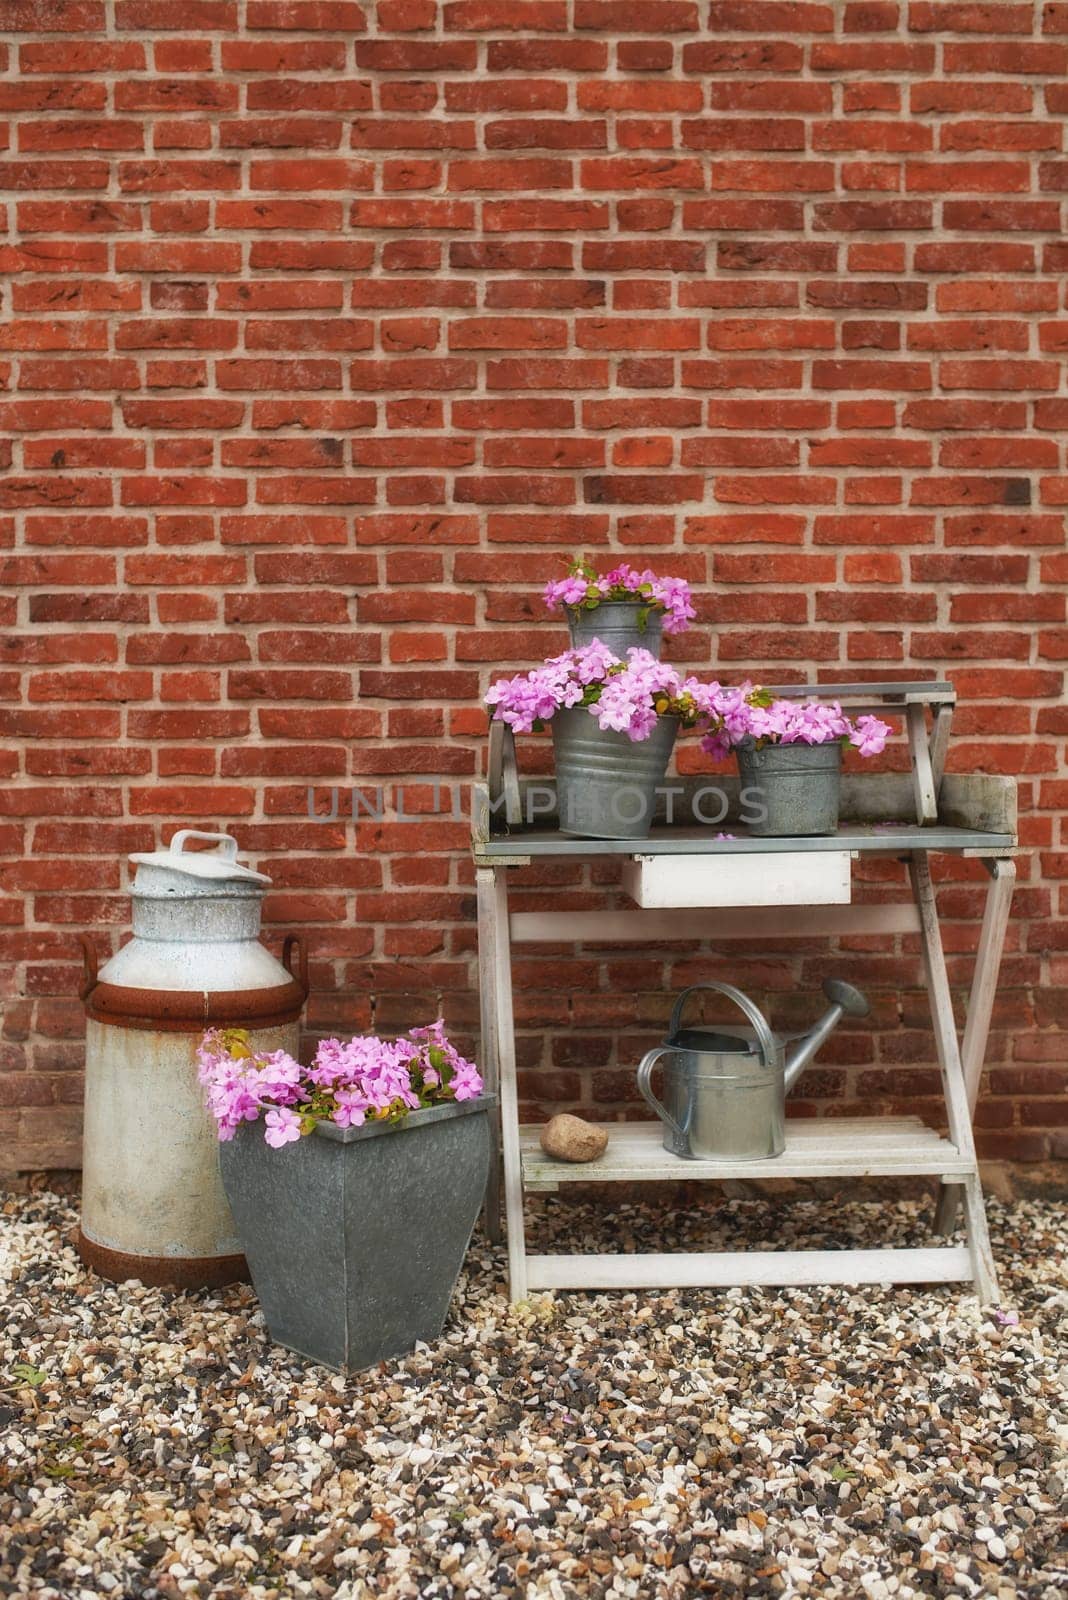 Spring, nature and garden with flower pot on shelf by brick wall, countryside and rural for plants. House, backyard and environment for growth, still life and container with rust and watering can by YuriArcurs